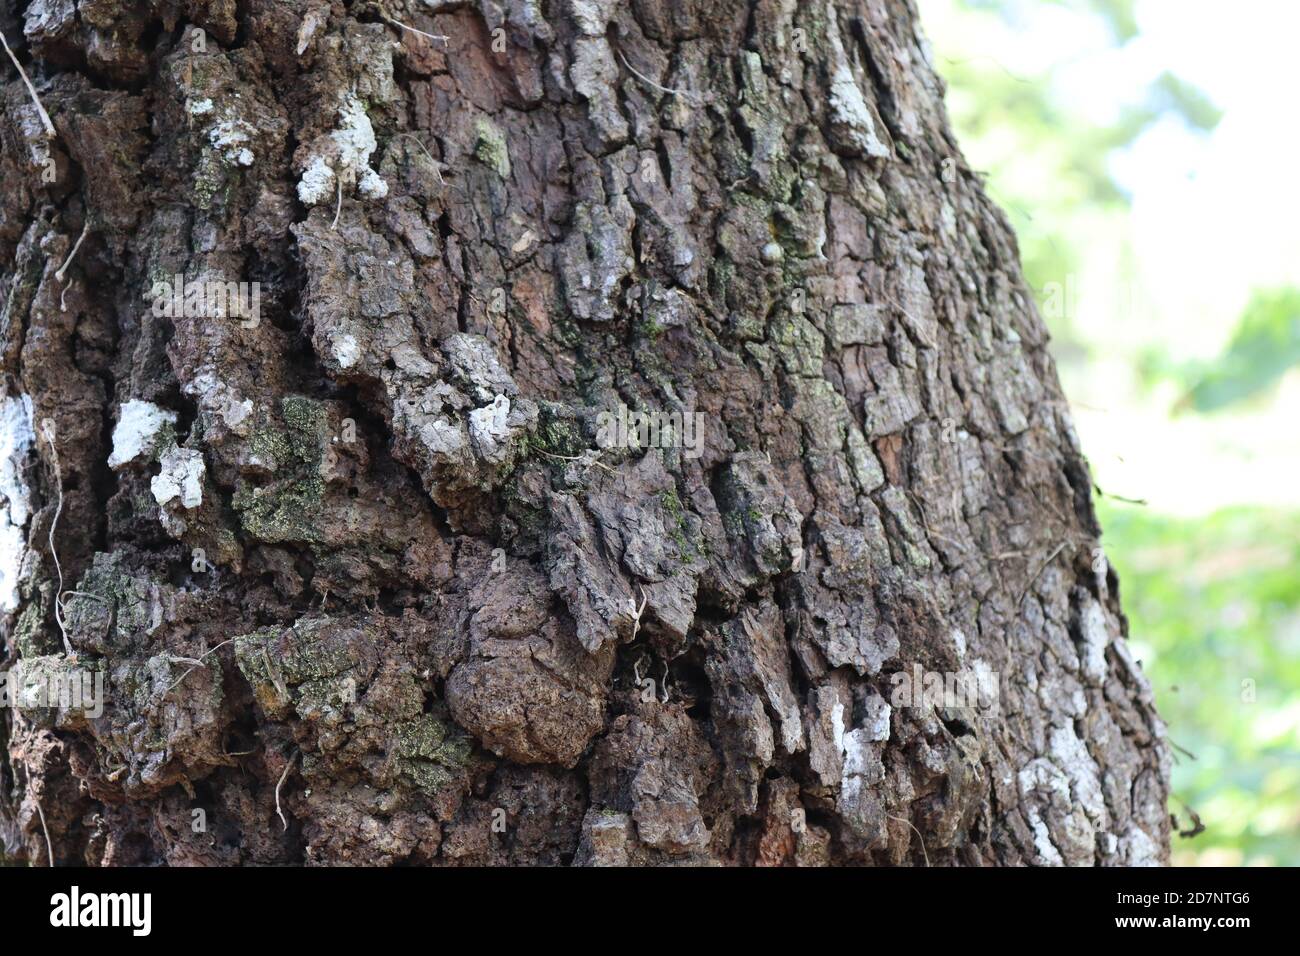 Cannot understand why this much deep and hard bark with this tree. 'Goraka' tree growing normally home gardens in villages in Sri Lanka. Stock Photo